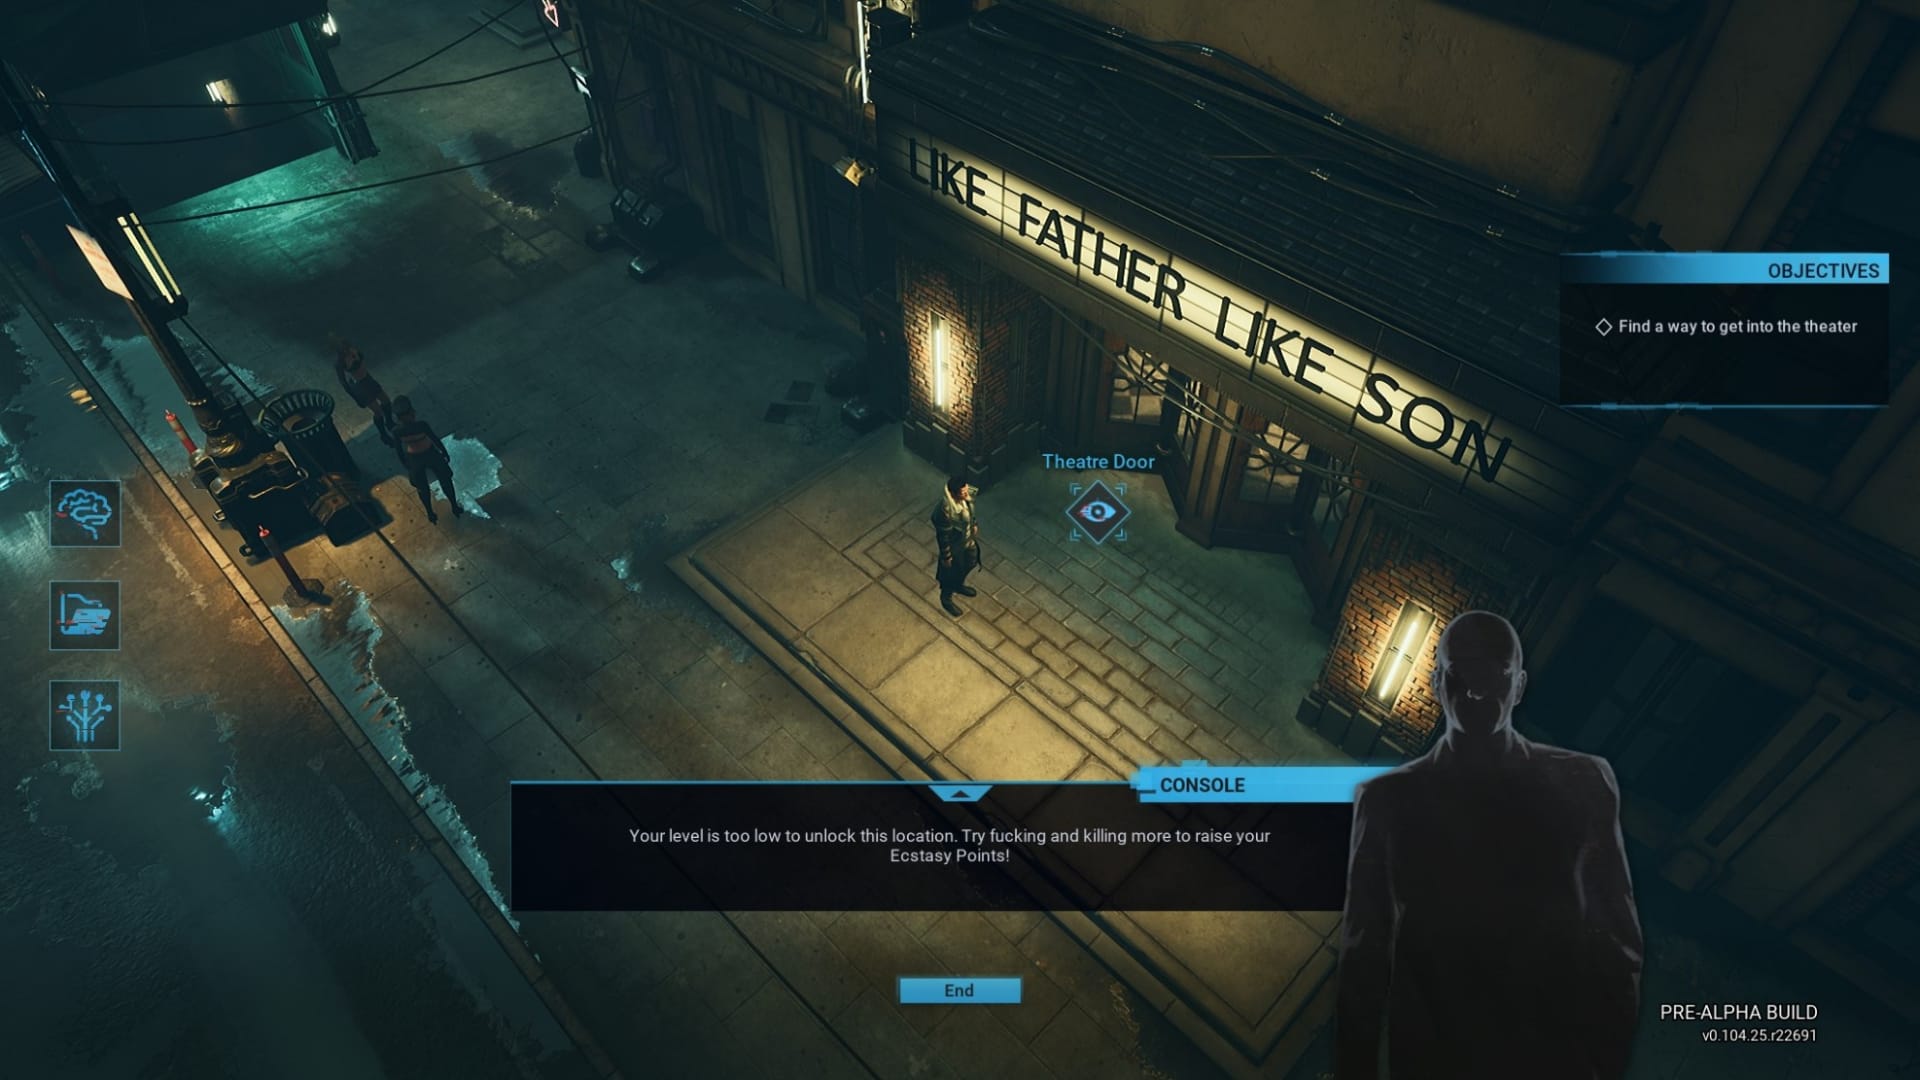 This cyberpunk rpg has a really cringeworthy obsession 3